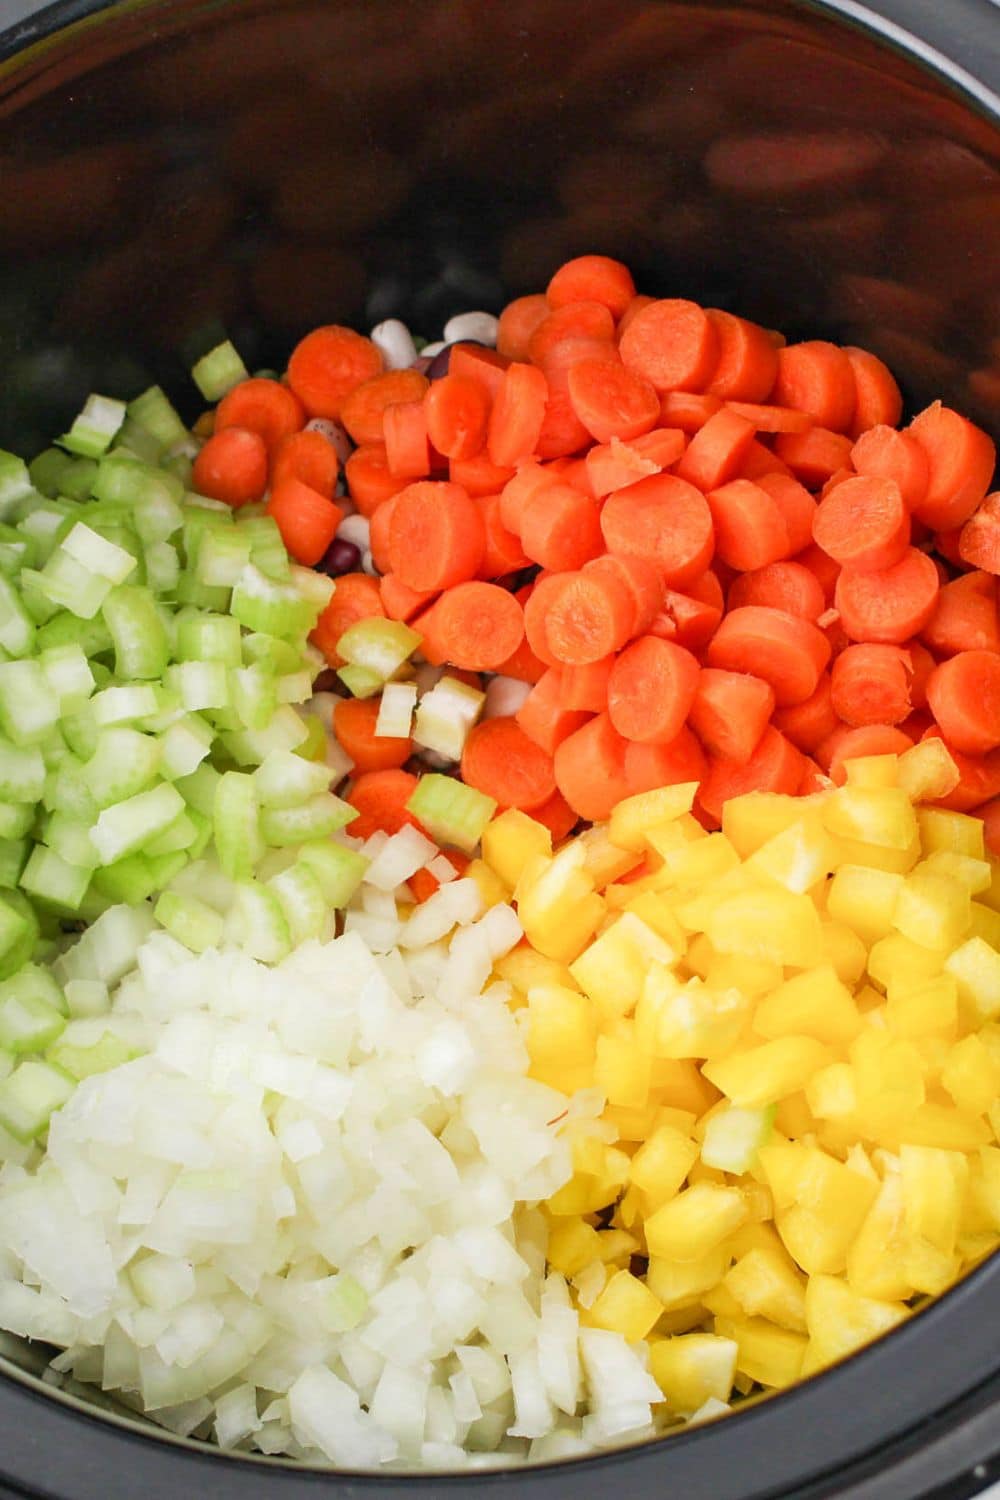 carrots, peppers, celery and onions diced finely topped dried beans in slow cooker on table